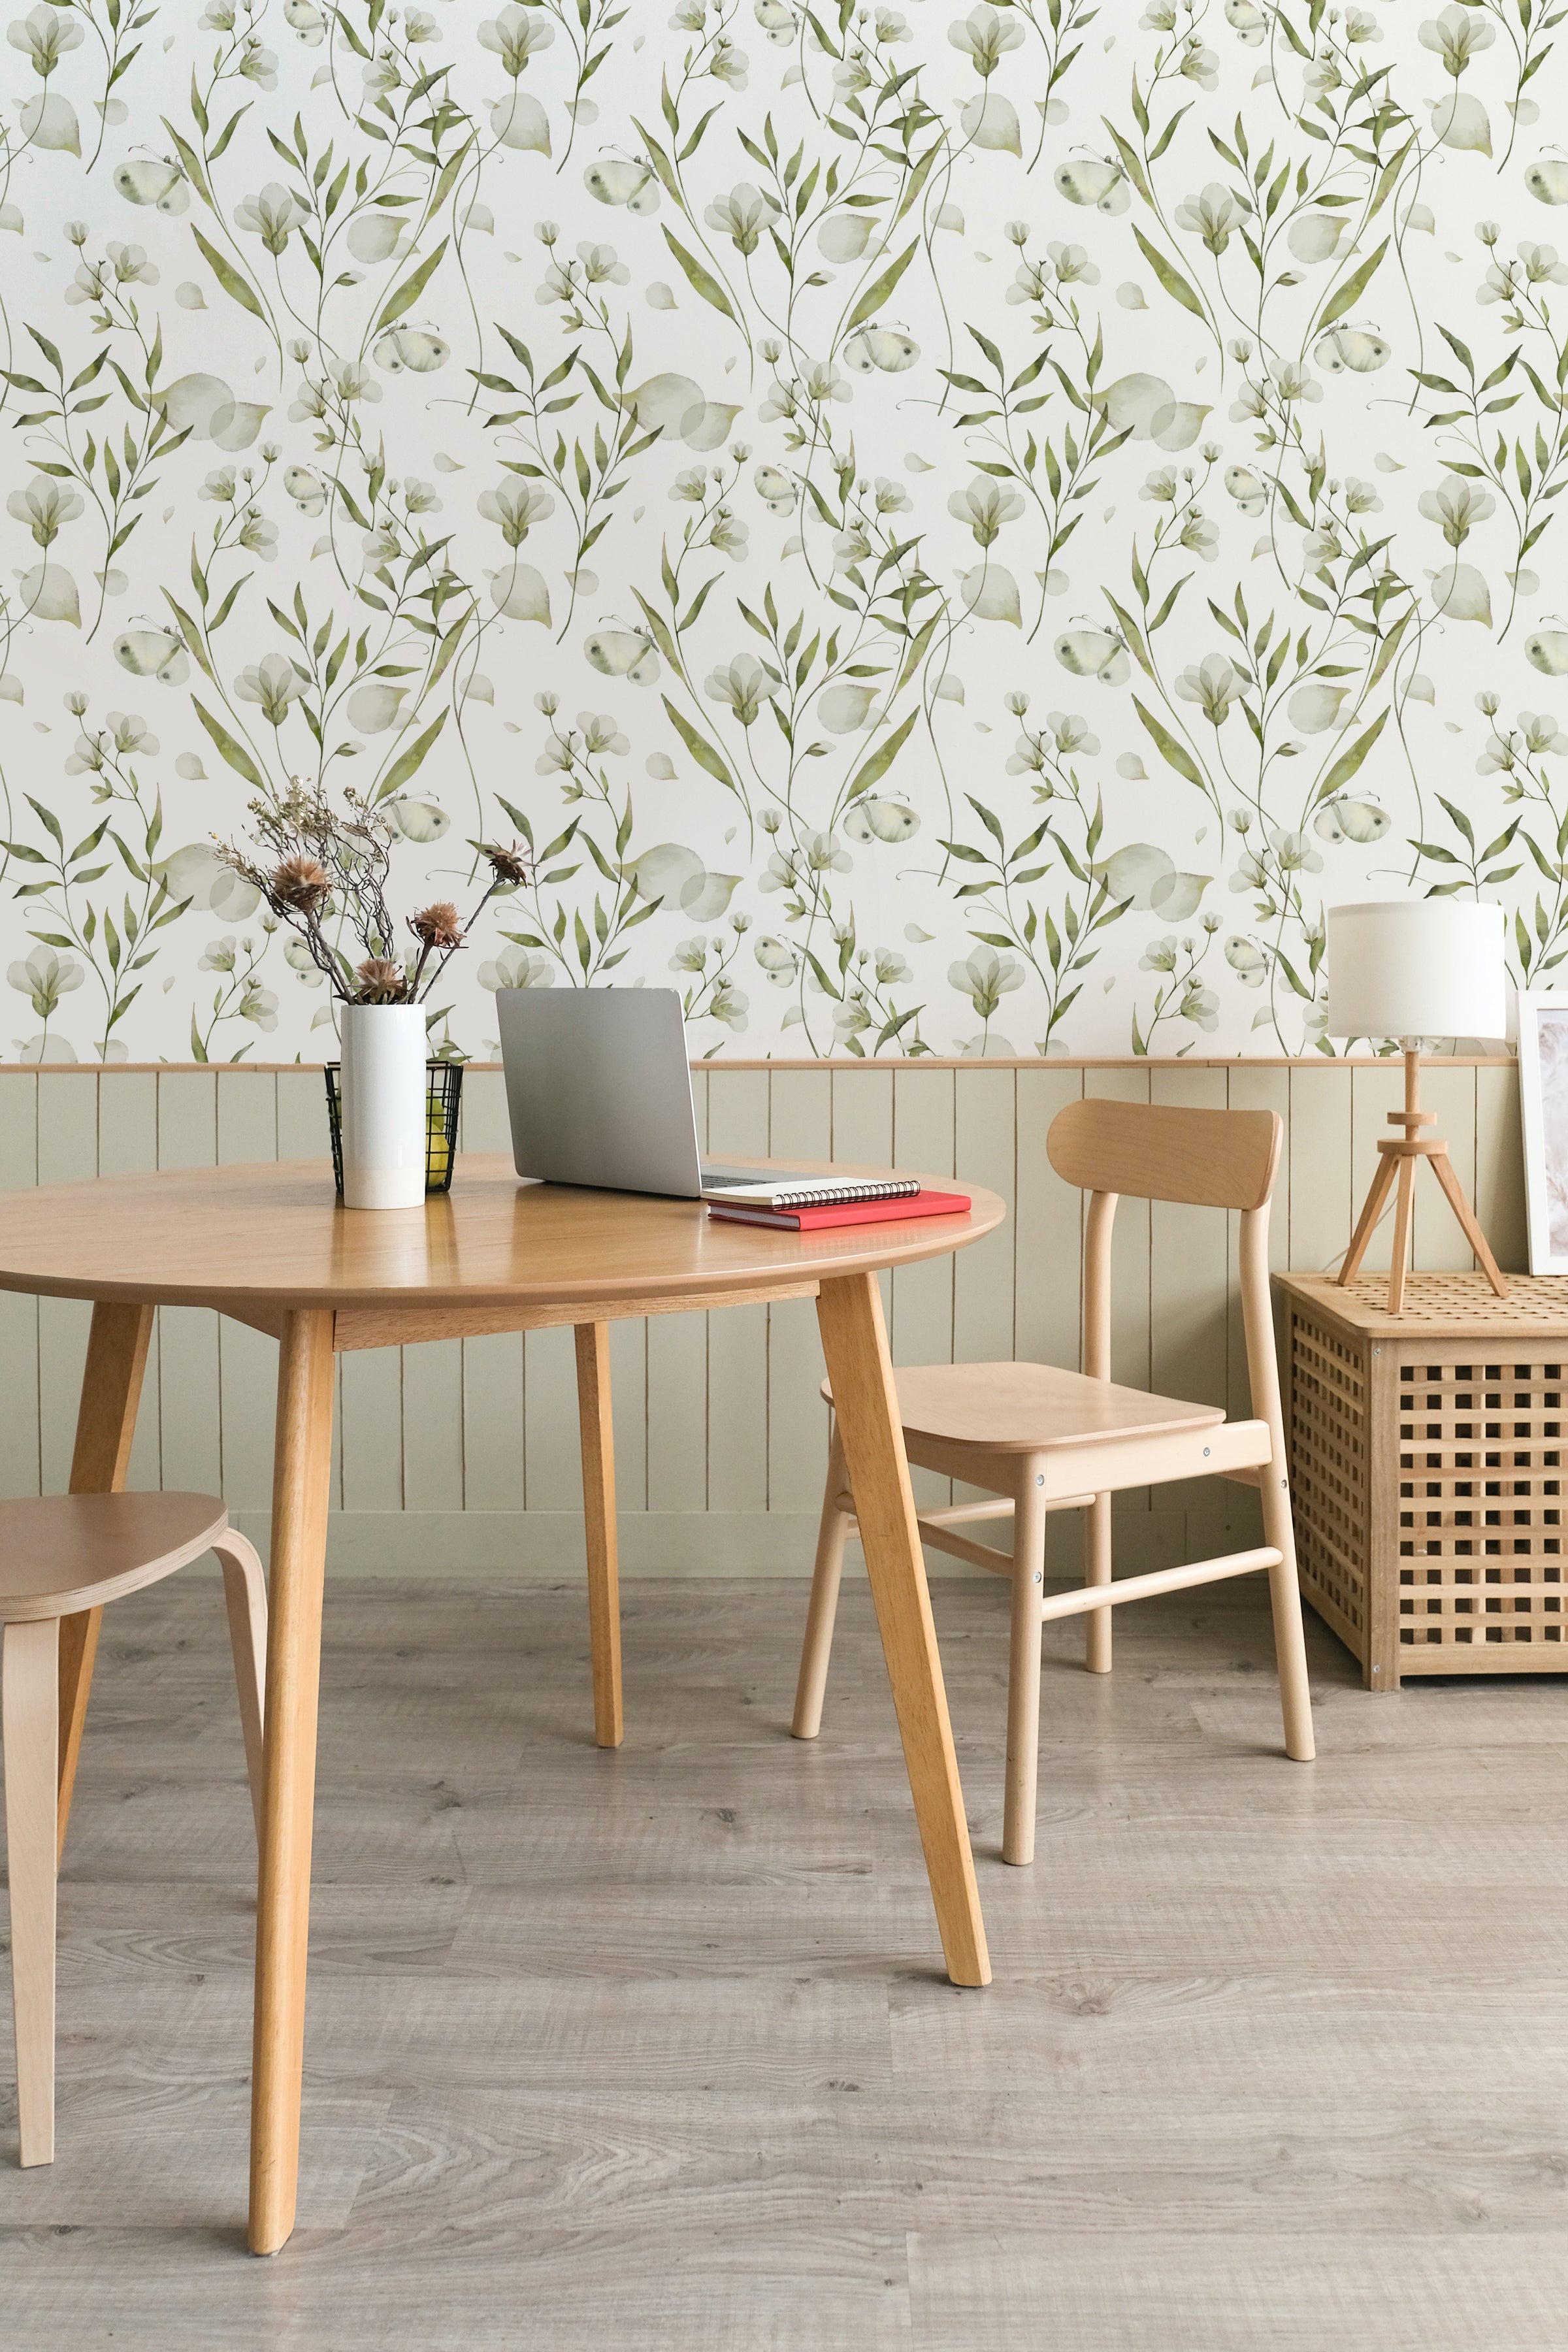 Botanical Bliss: Greenery Wallpaper to Infuse Nature Into Your Home